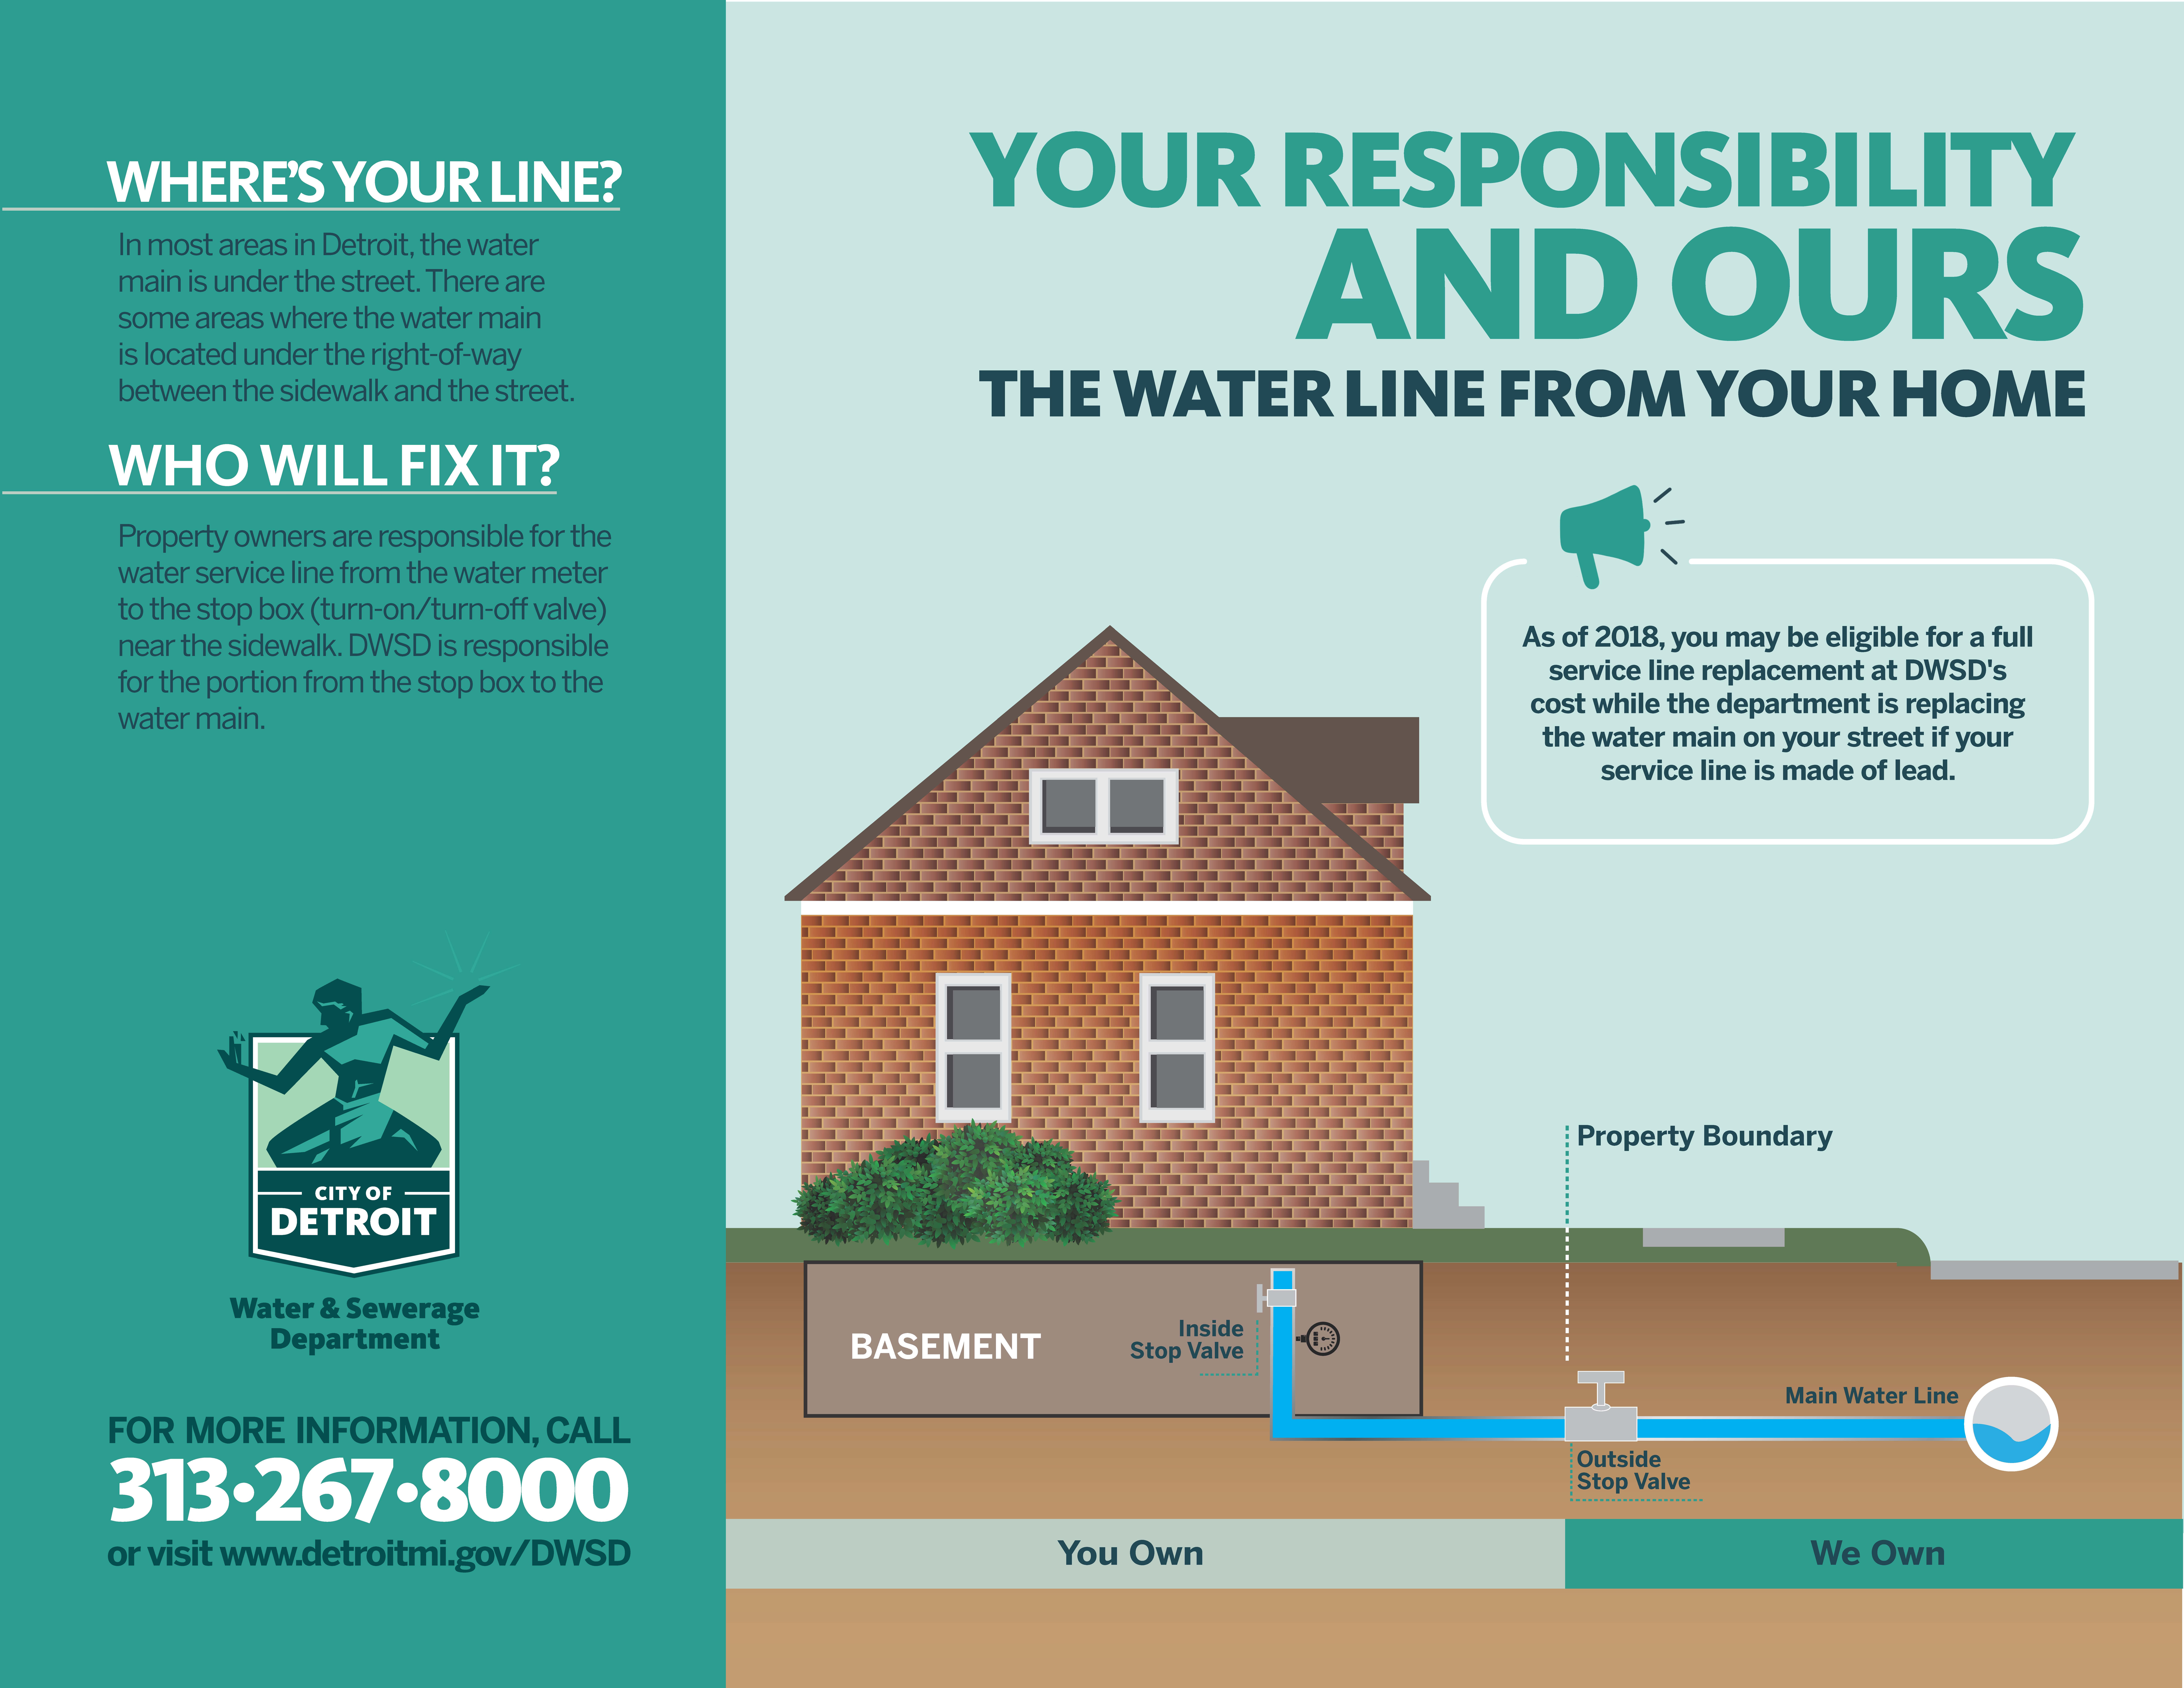 What is a water service line and who is responsible?